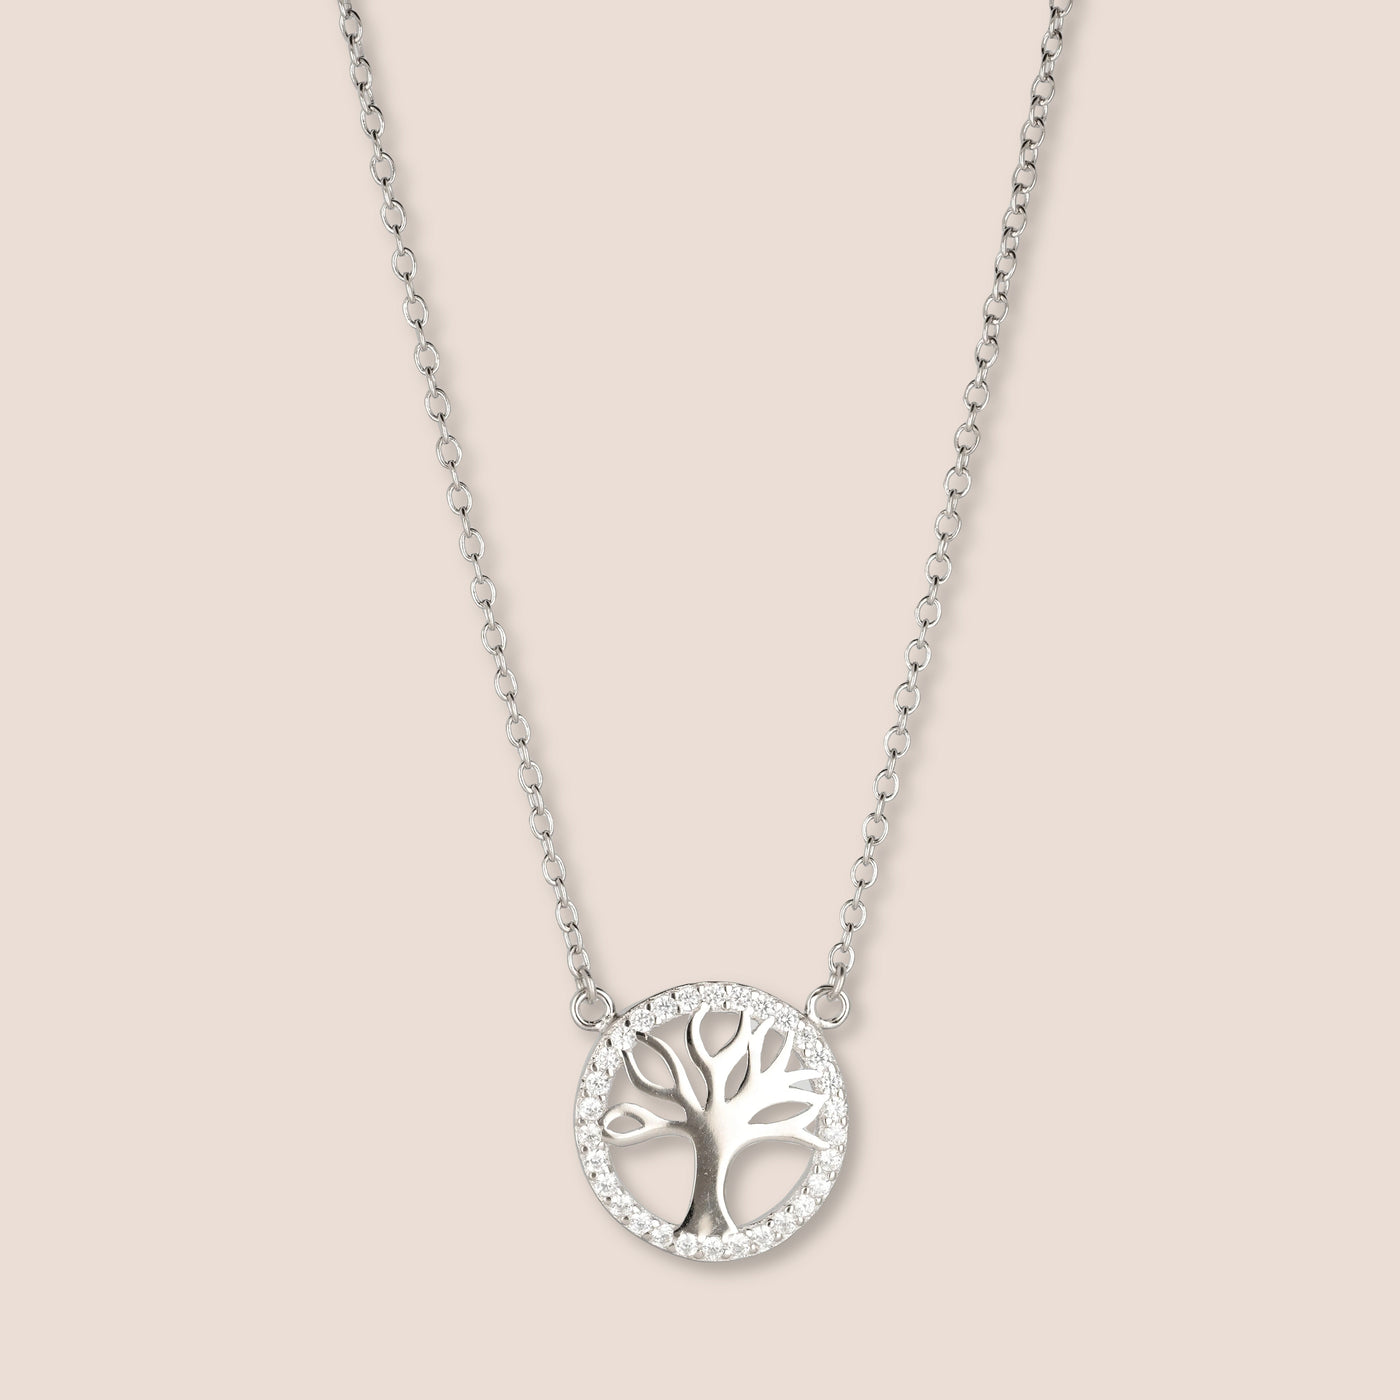 Silver Tree of Life Gemstone Necklace